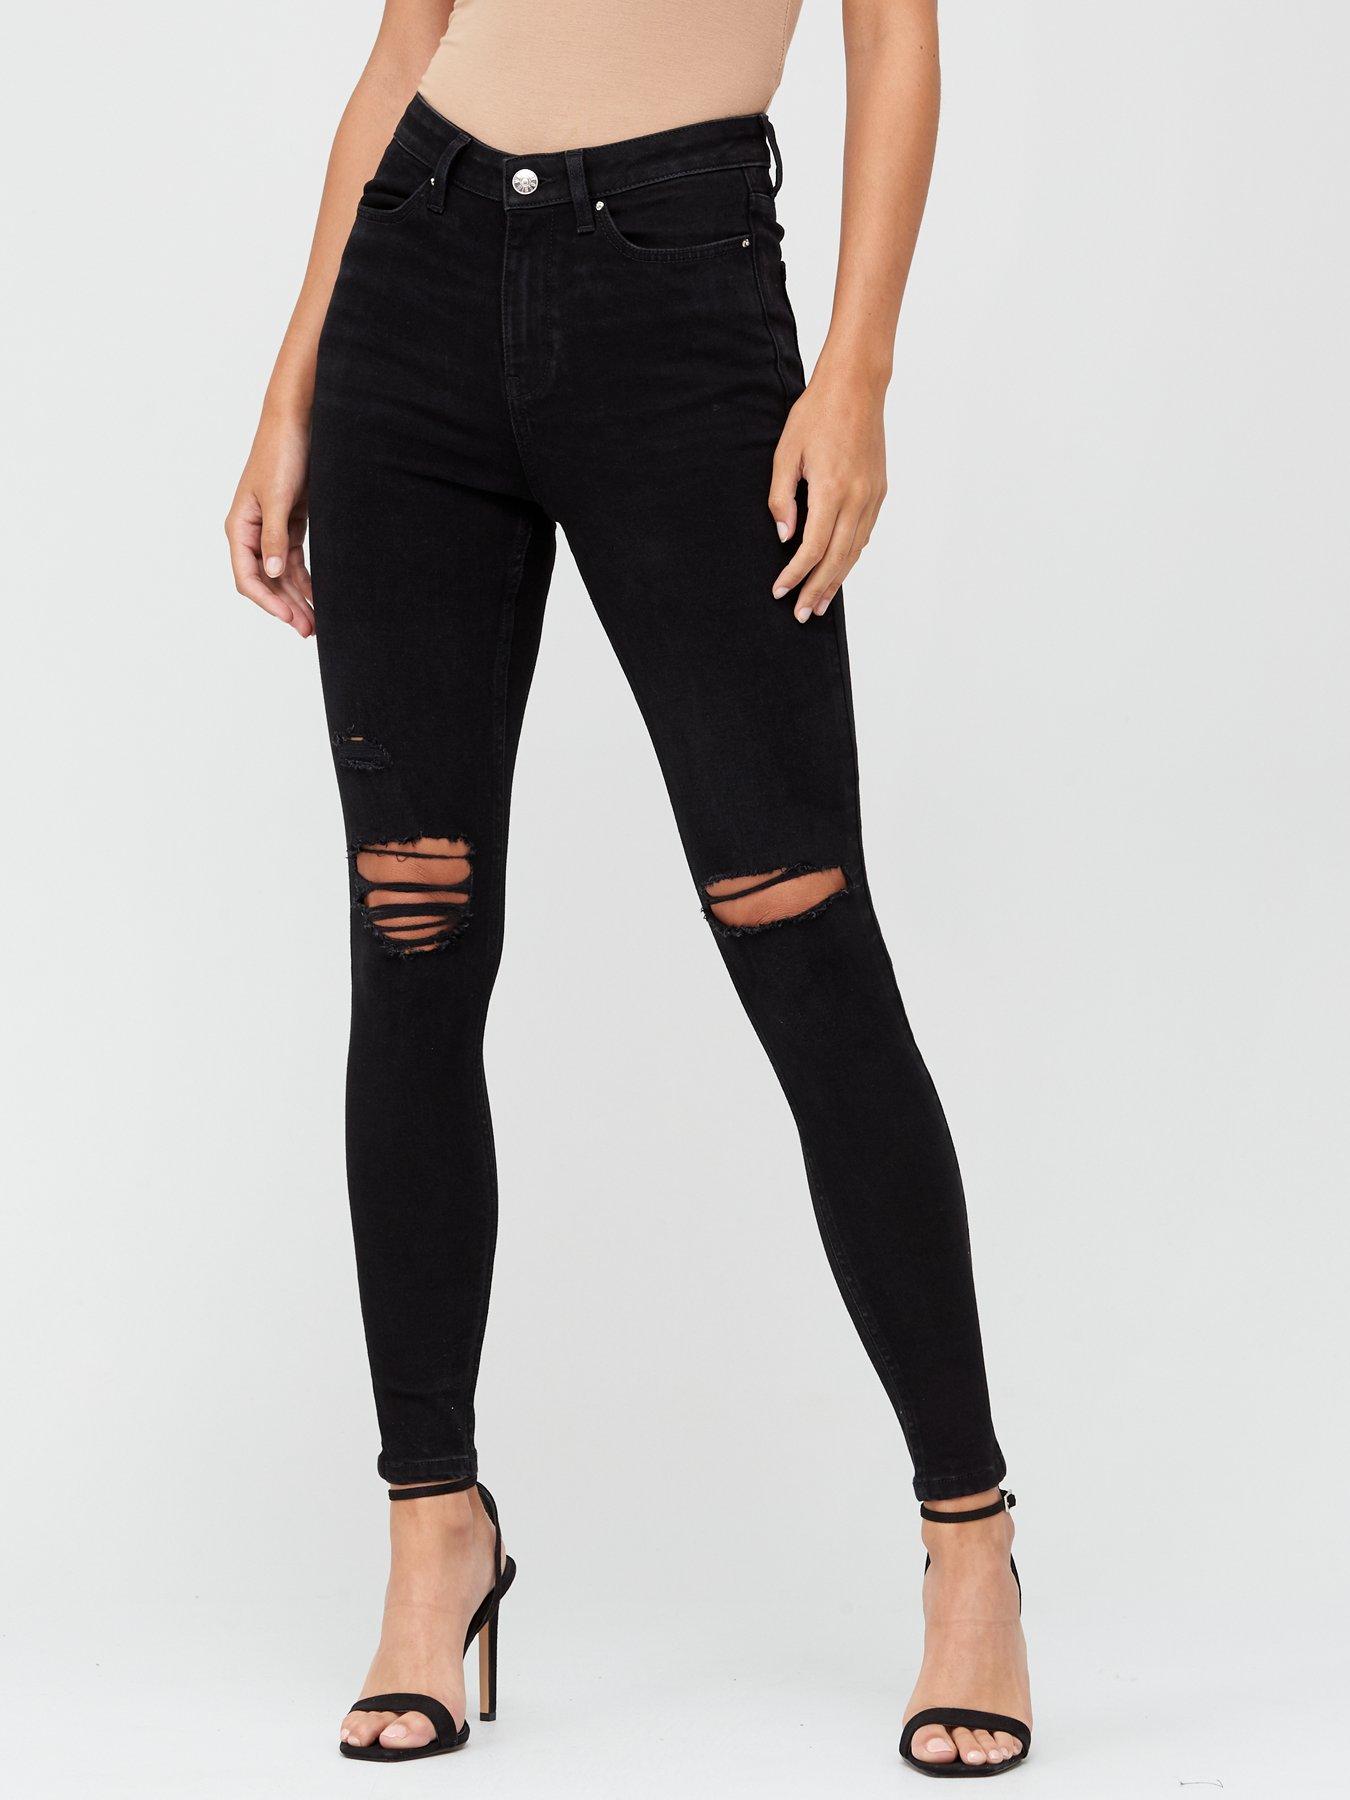 womens ripped jeans uk